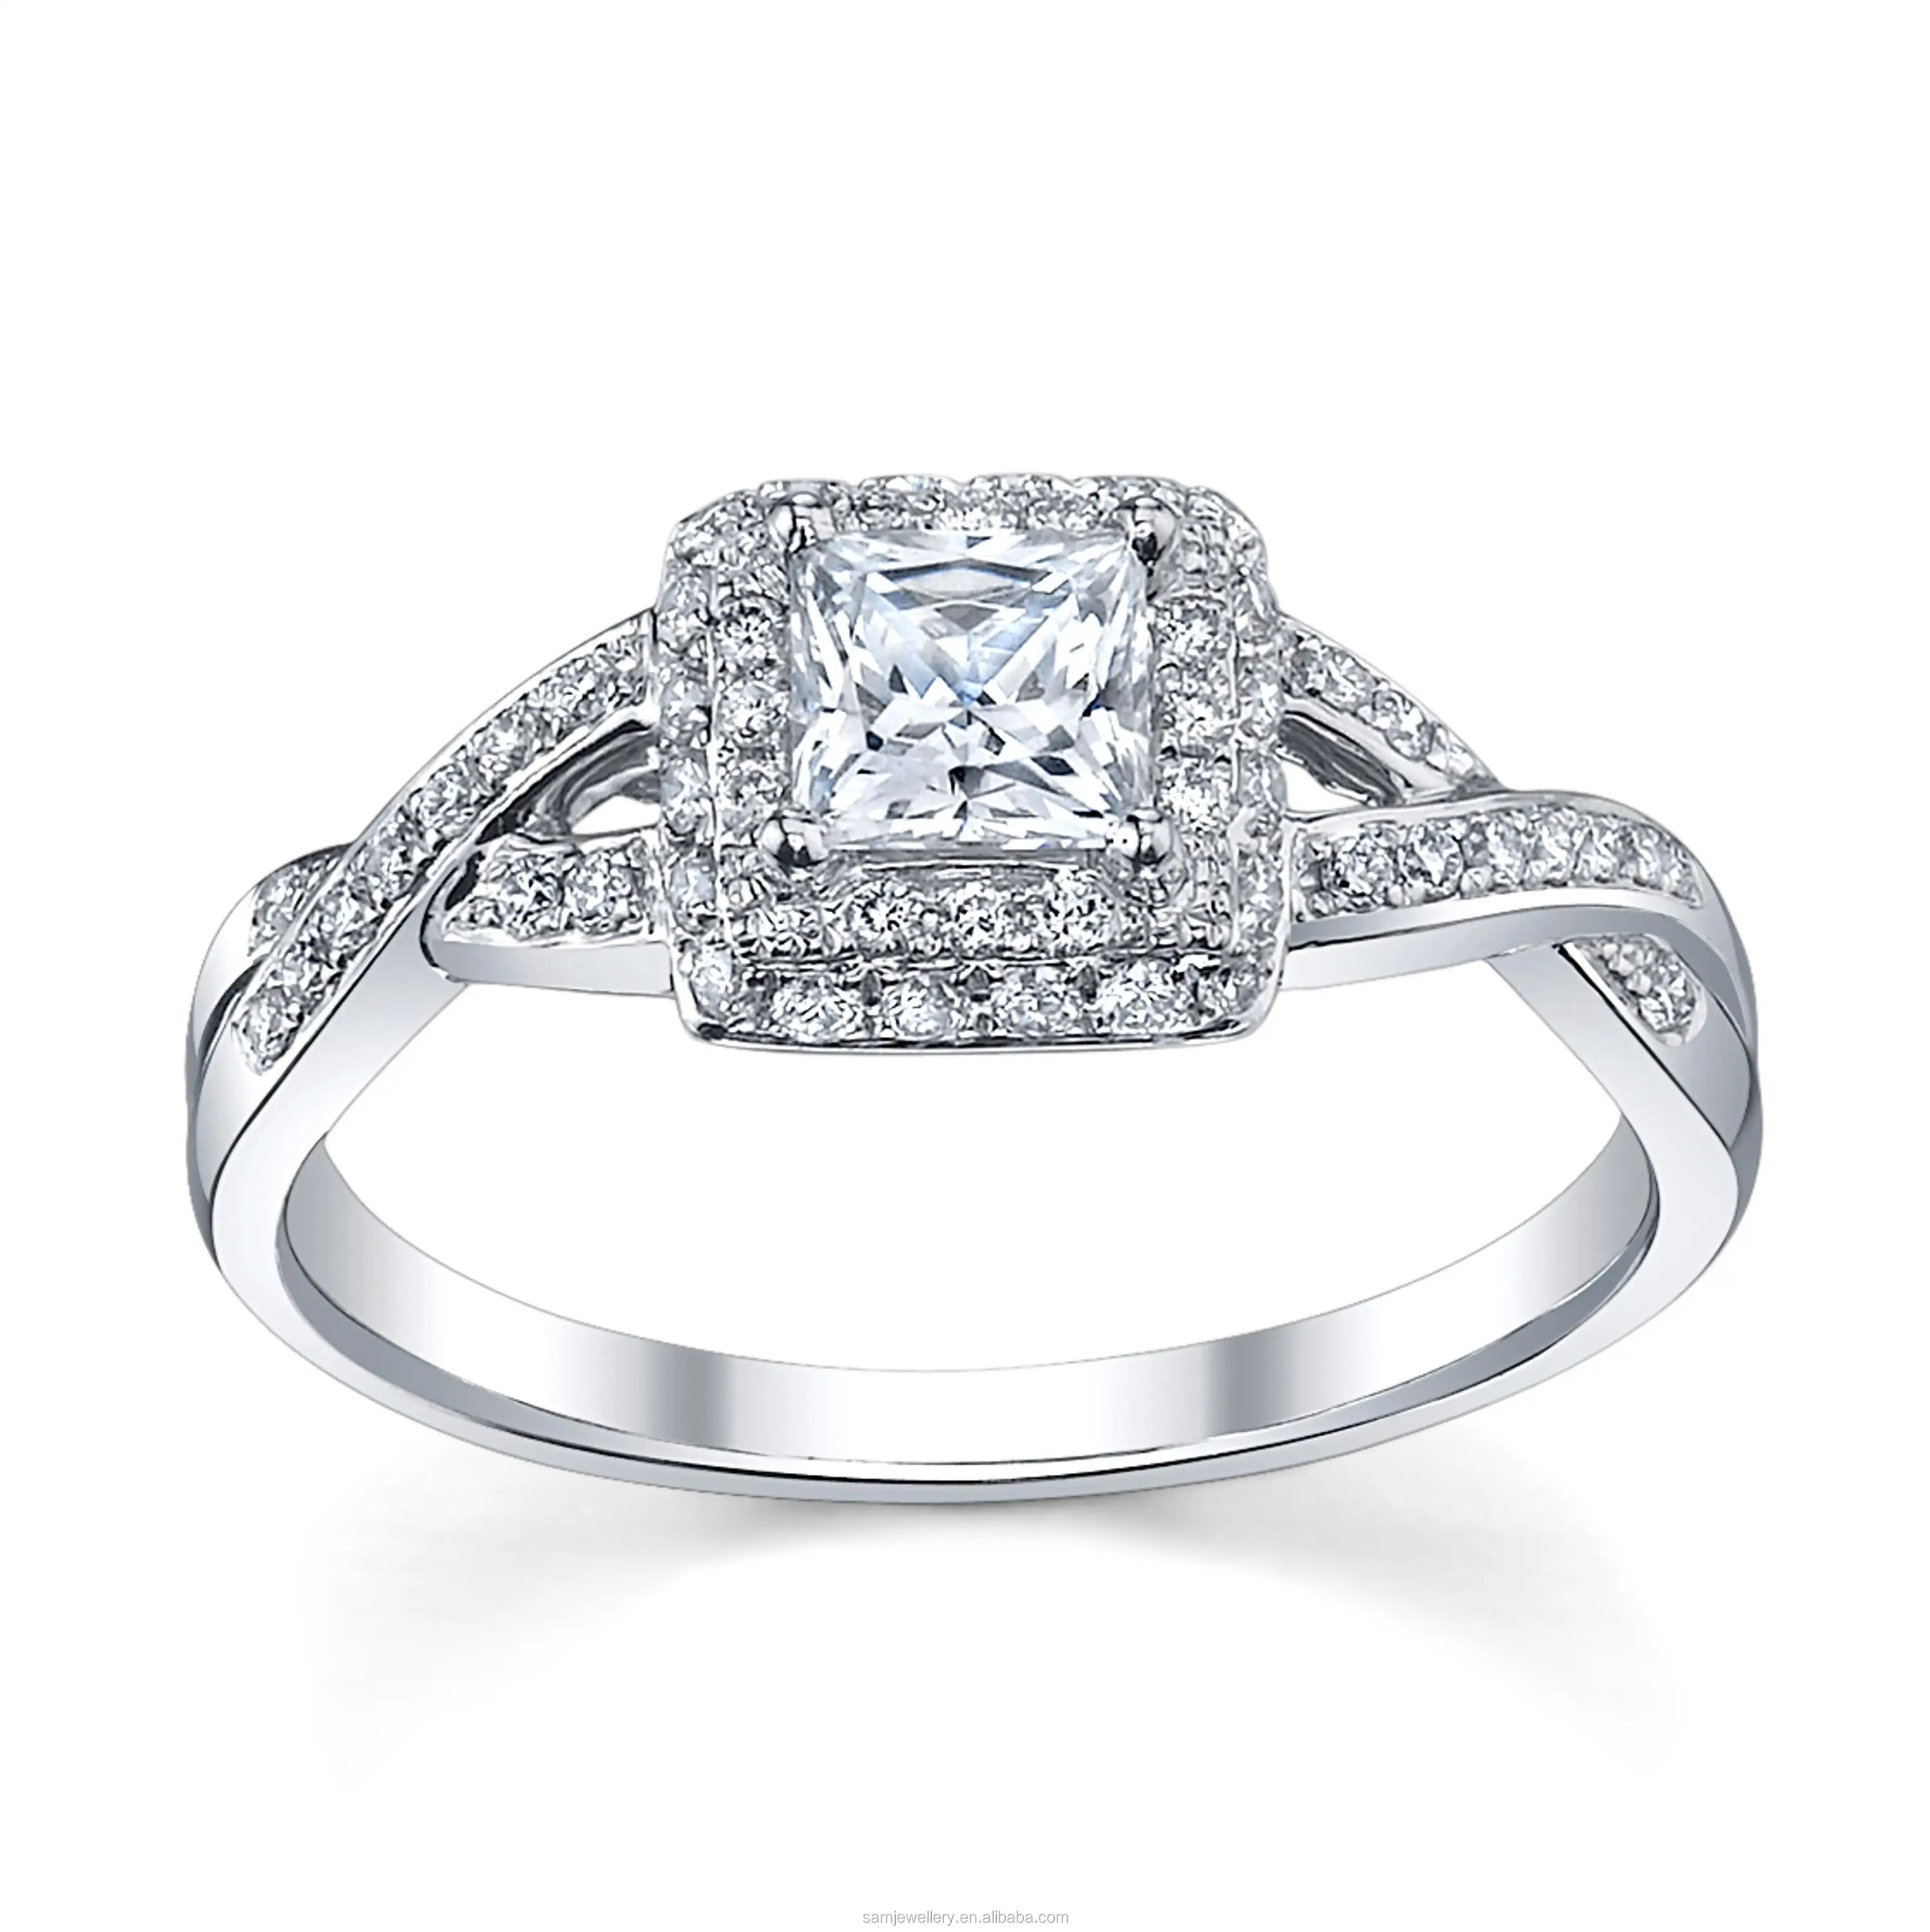 Princess Cut Cz Diamond Sterling 925 Silver Halo Engagement Ring Finger Ring  Women - Buy Princess Cut Cz Ring,Silver Wedding Ring,New Engagement Ring  Product on Alibaba.com